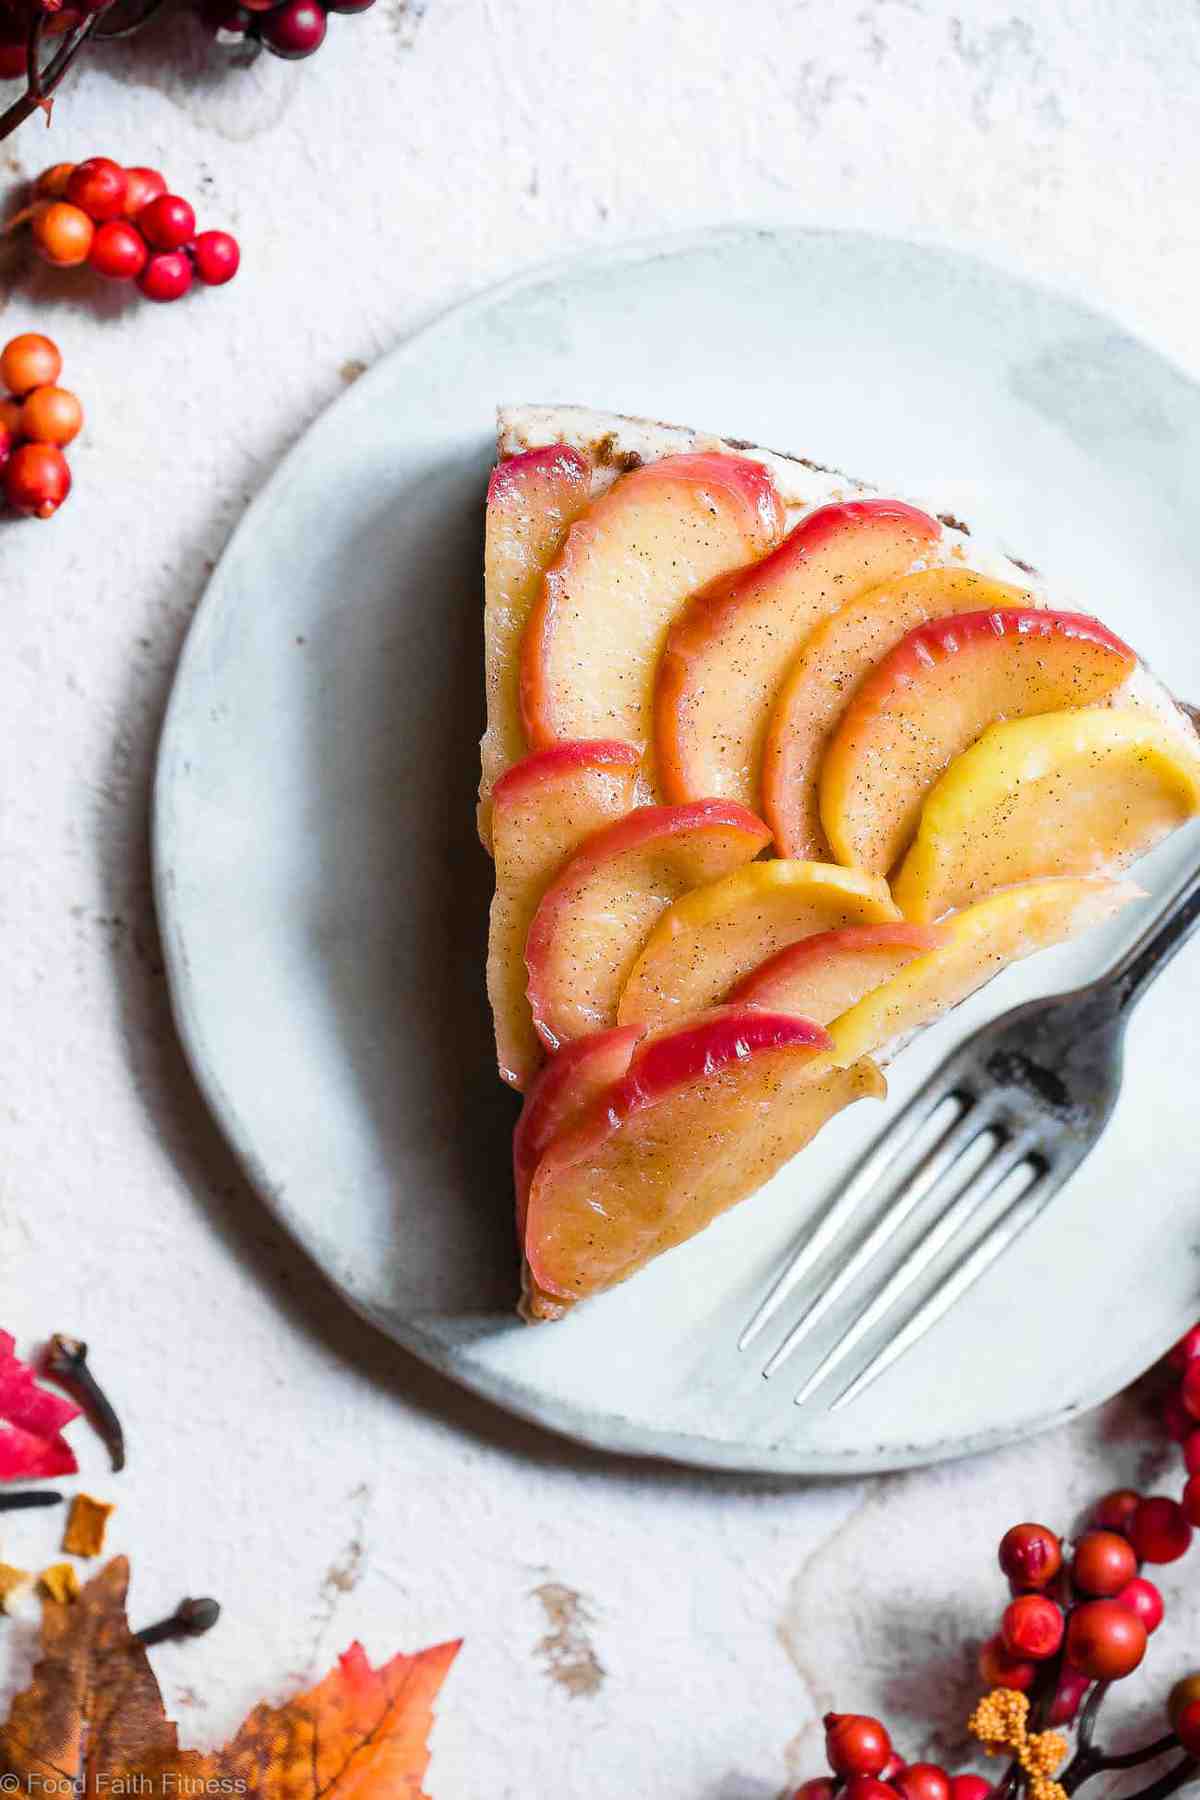 Honey Apple Goat Cheese Cheesecake - This creamy chevre cheesecake is topped with cinnamon honey apples and is perfectly sweet and a little bit tangy! Gluten free, grain free and made with Greek yogurt to keep it light! My husband said it's the best dessert he has ever had! | #Foodfaithfitness | #Glutenfree #Cheesecake #Grainfree #Healthy #Goatcheese